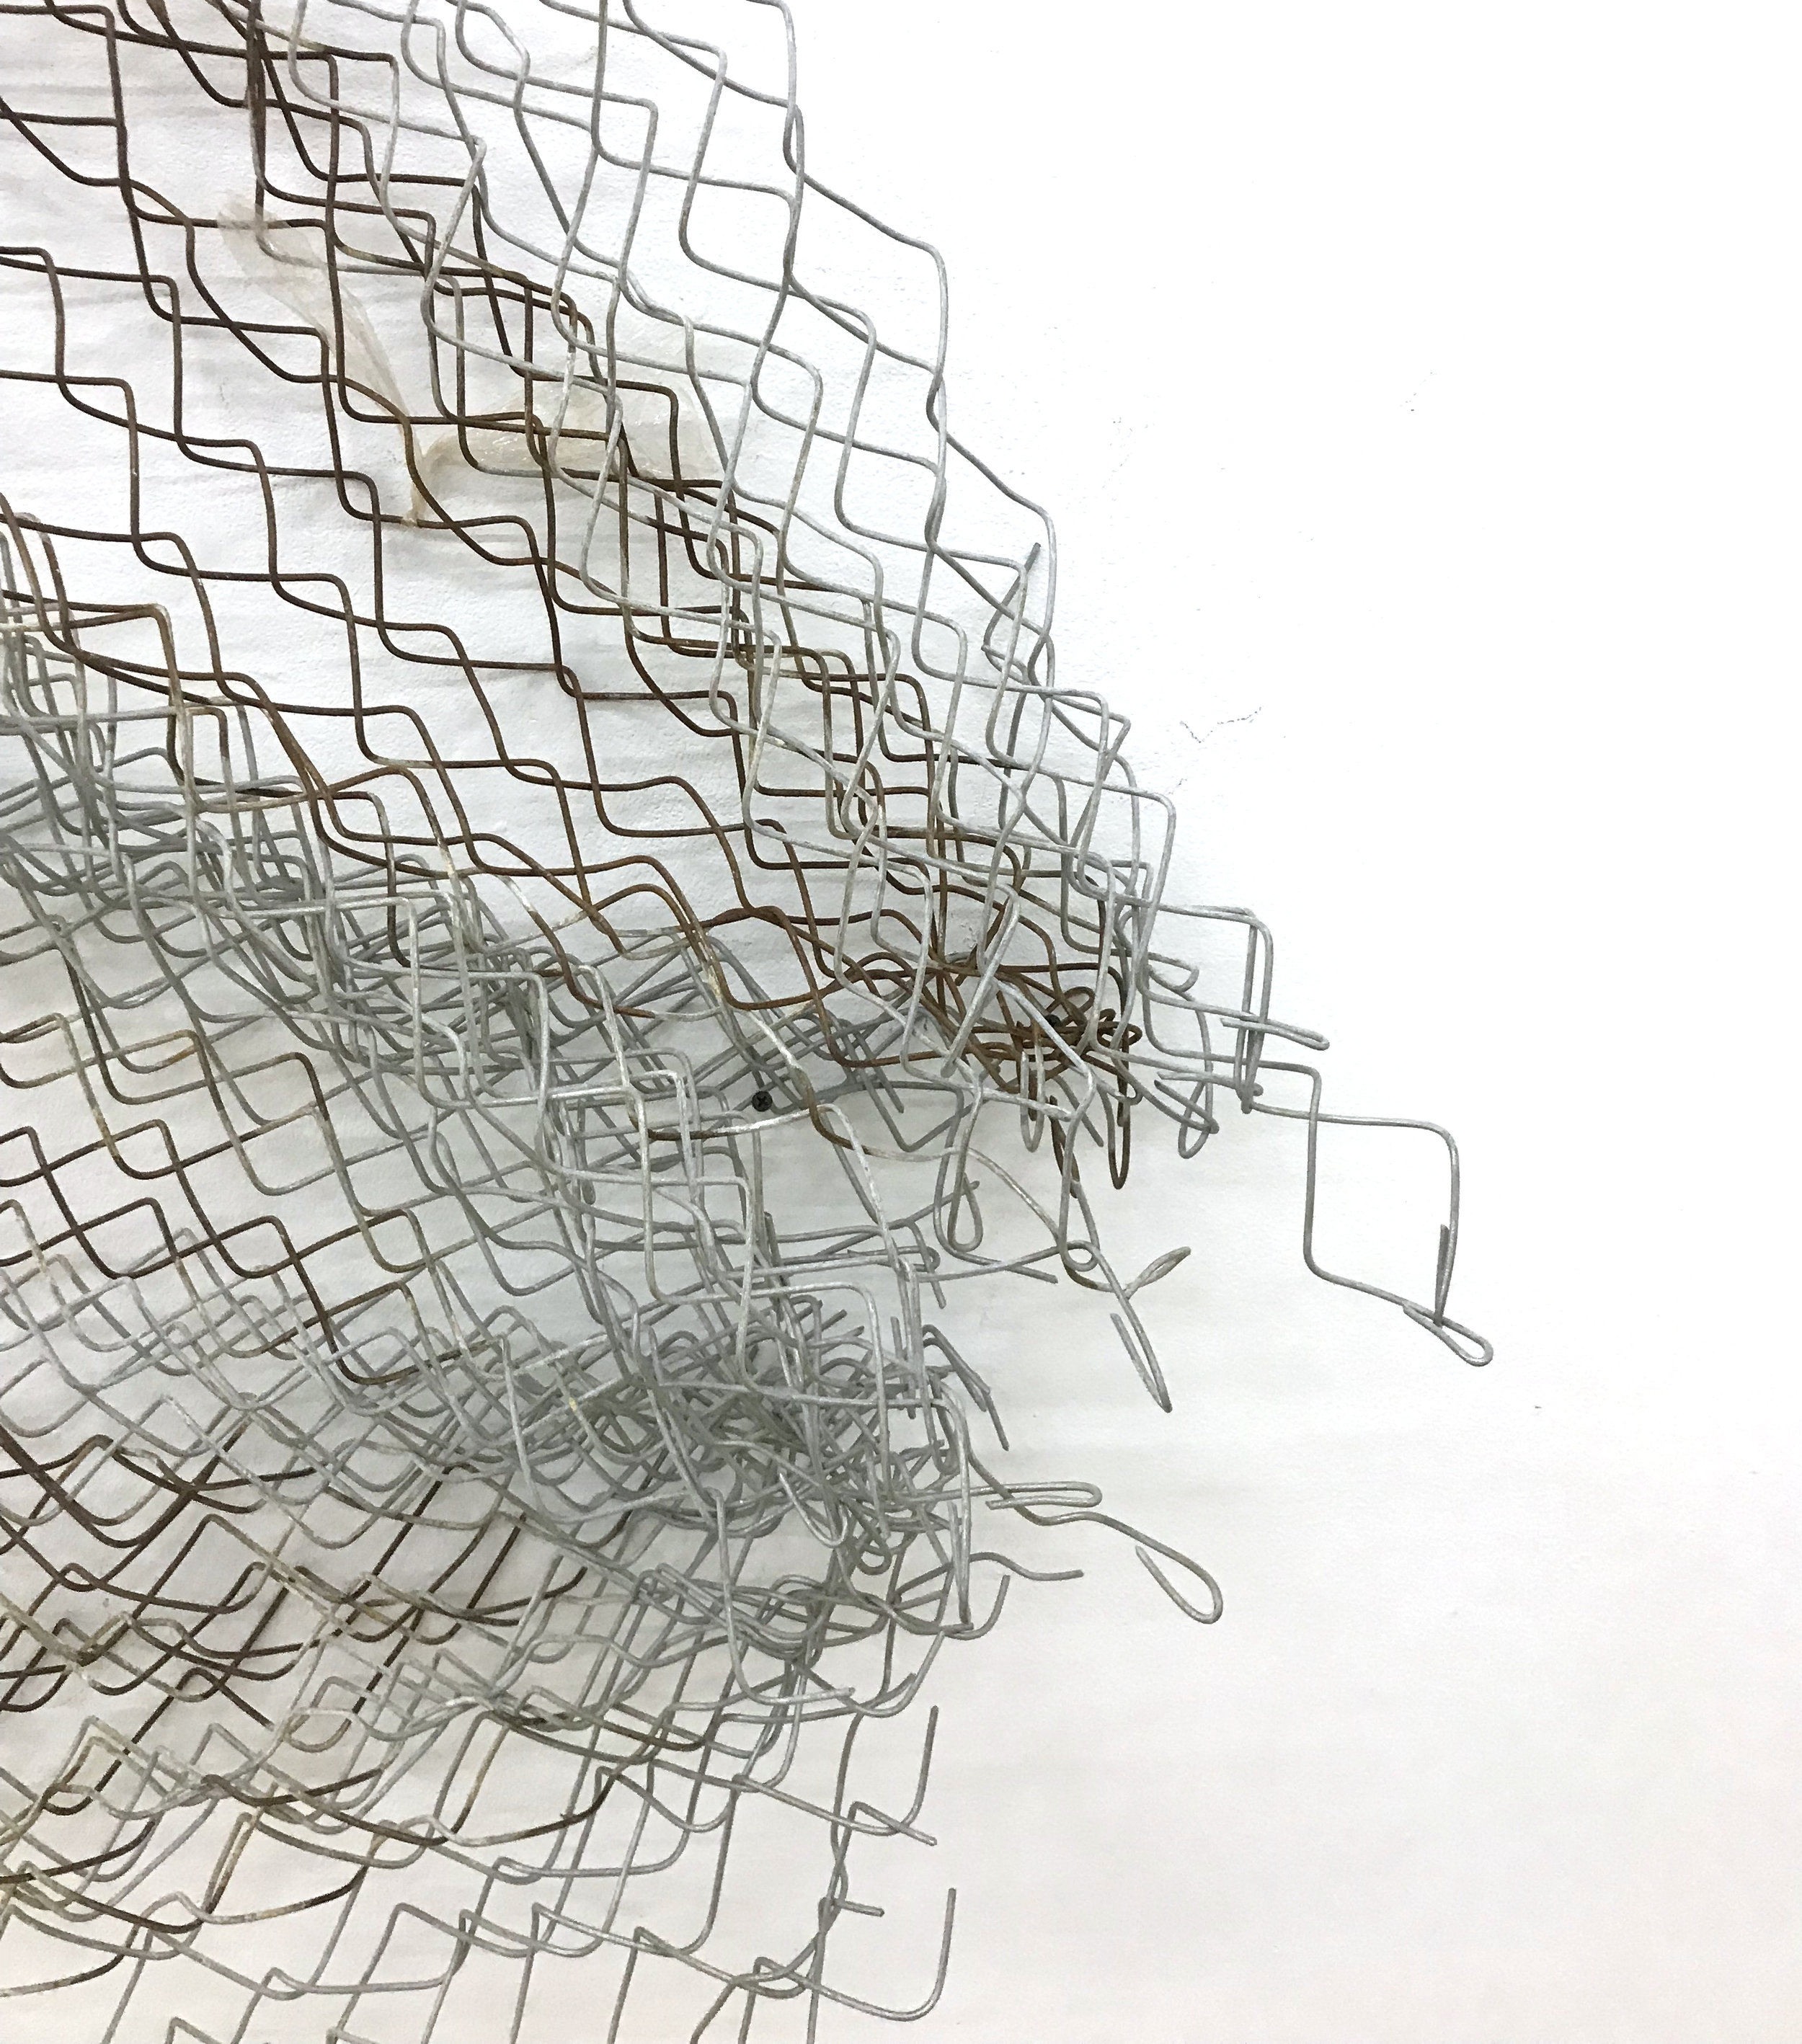  Sean Donovan  Untitled , 2018 (detail) acid soaked galvanized chain-link fencing, screws 83 x 72 x 9 inches (211 x 183 x 23 cm) (SD46) 